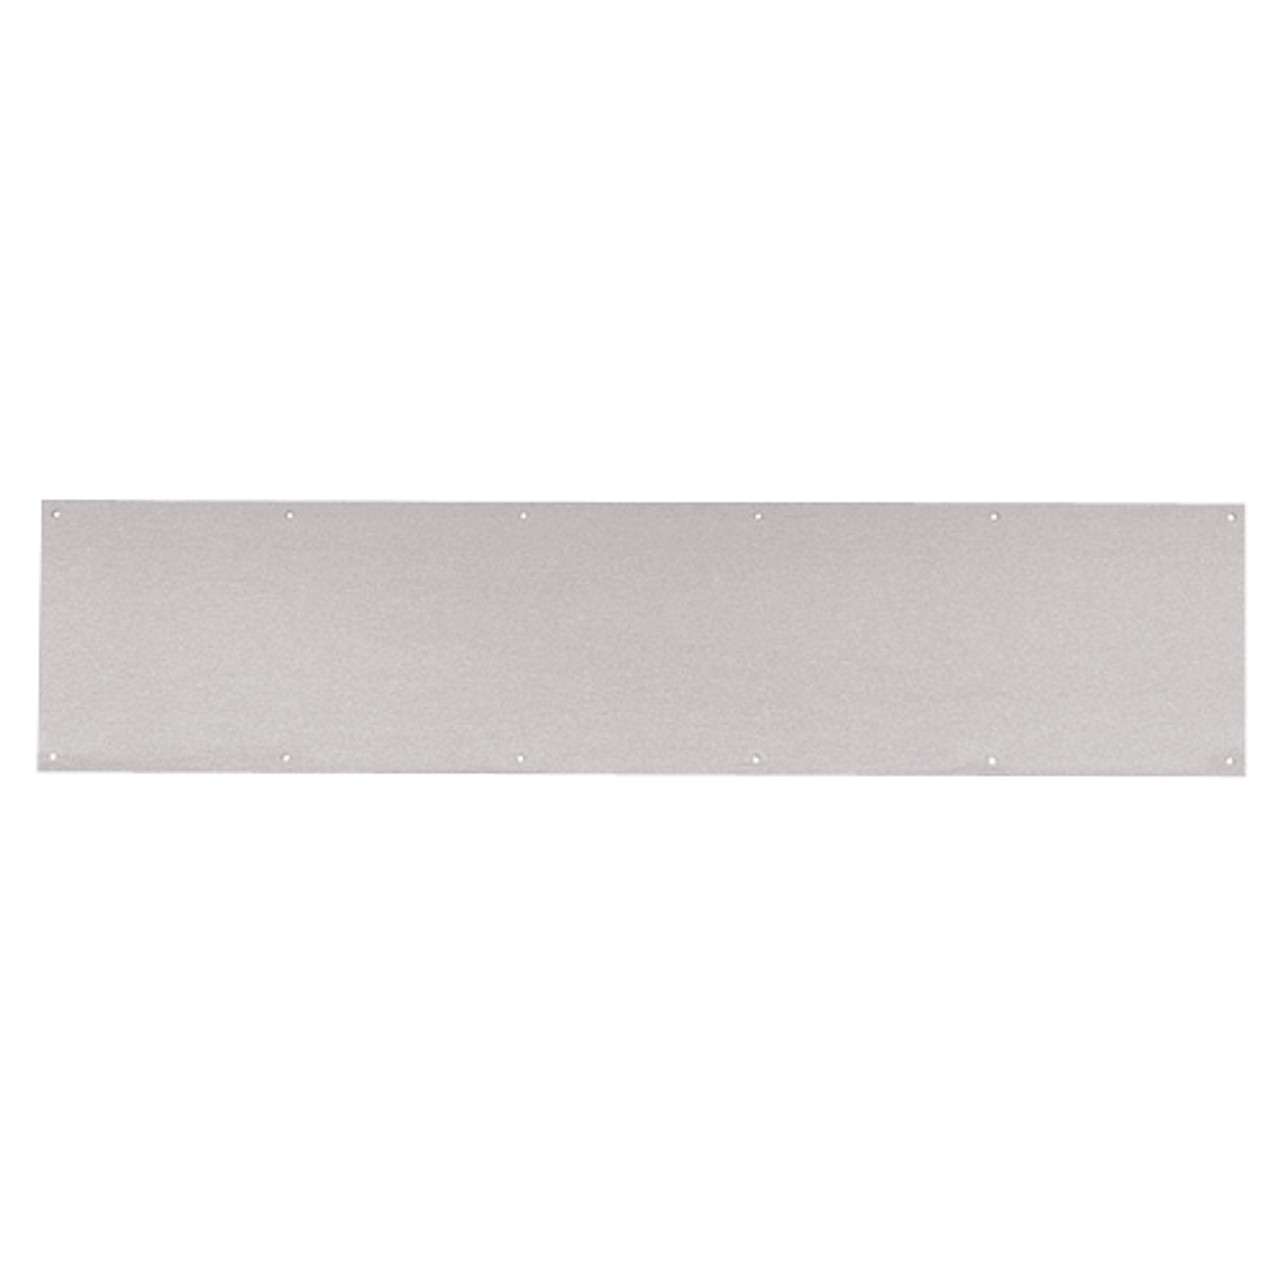 8400-US32D-8x41.5-B-CS Ives 8400 Series Protection Plate in Satin Stainless Steel